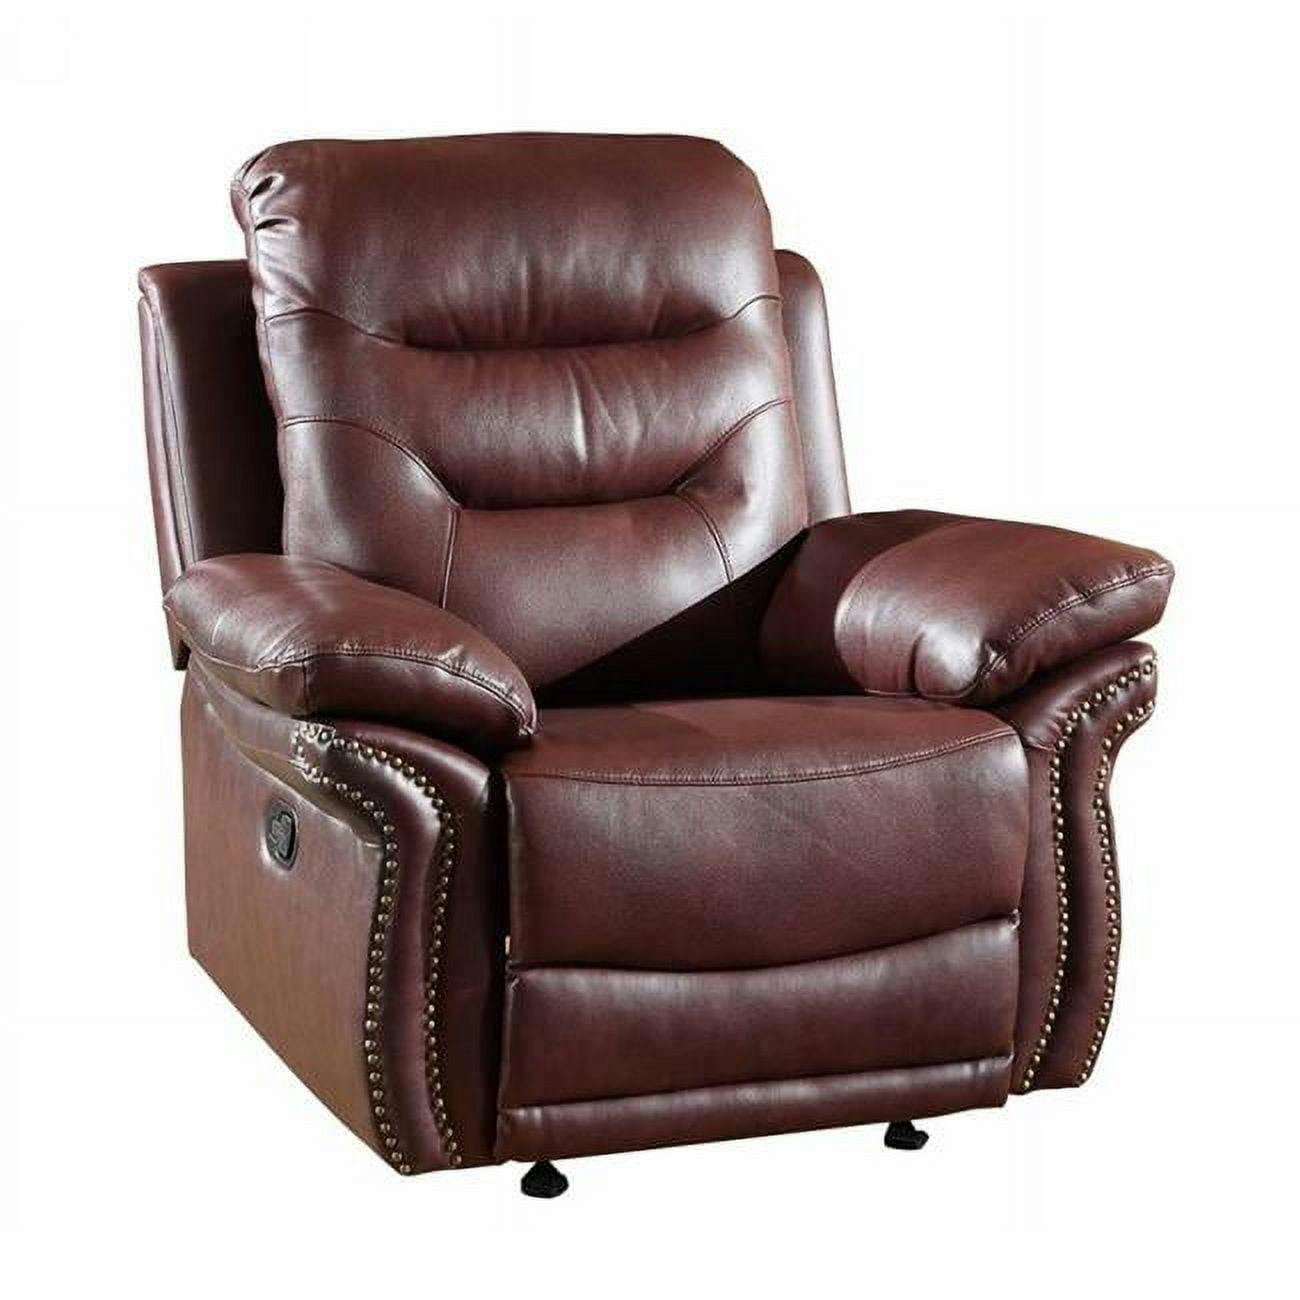 Sophisticated Burgundy Microfiber and Wood 44" Recliner Chair